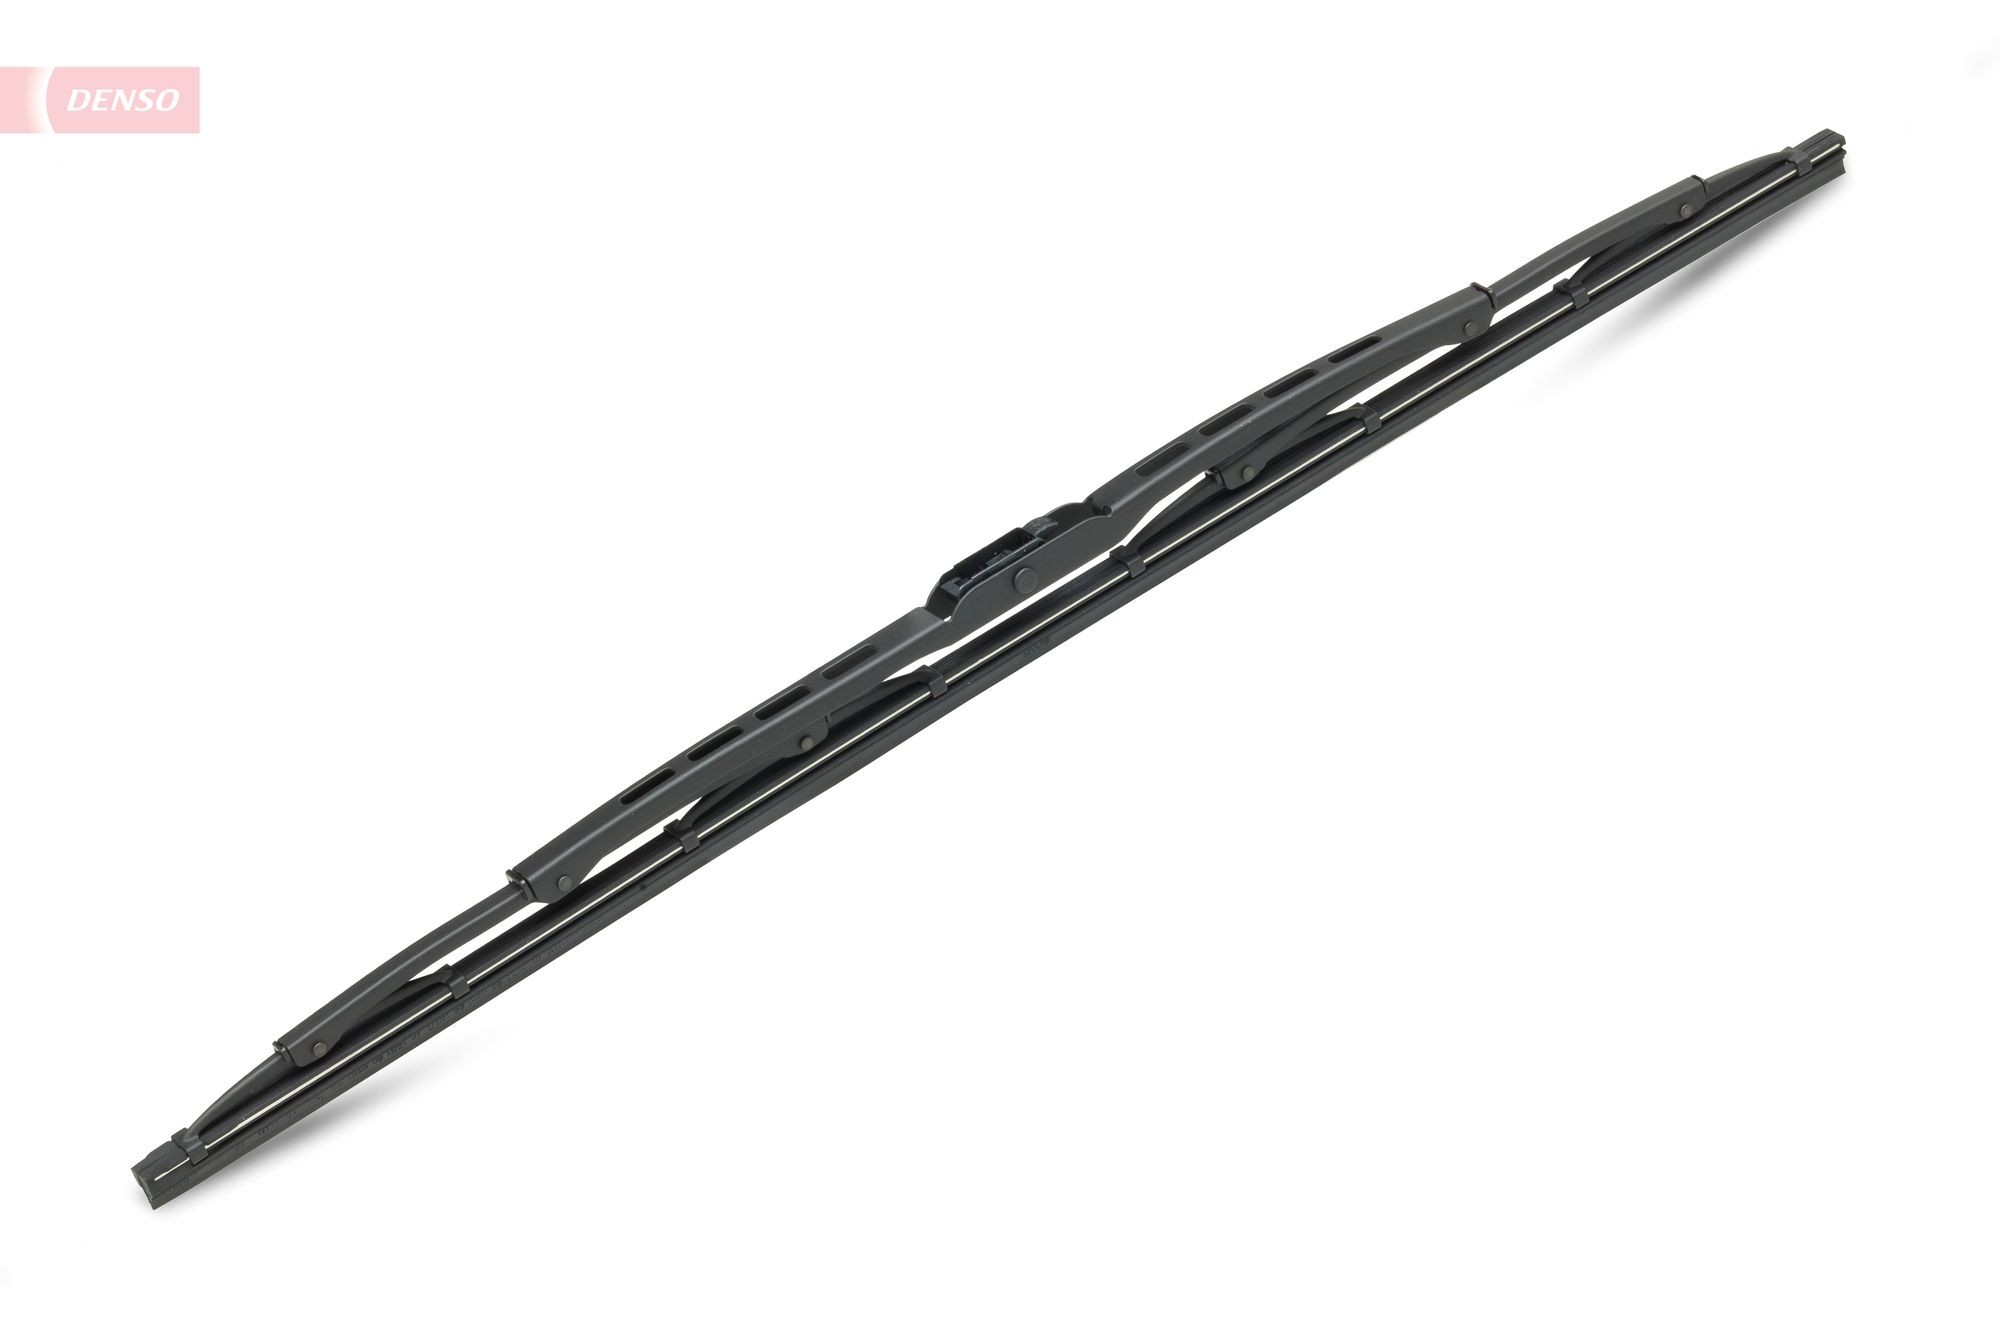 DENSO Wiper blade rear and front FORD Transit Mk3 Van (VE64) new DM-055